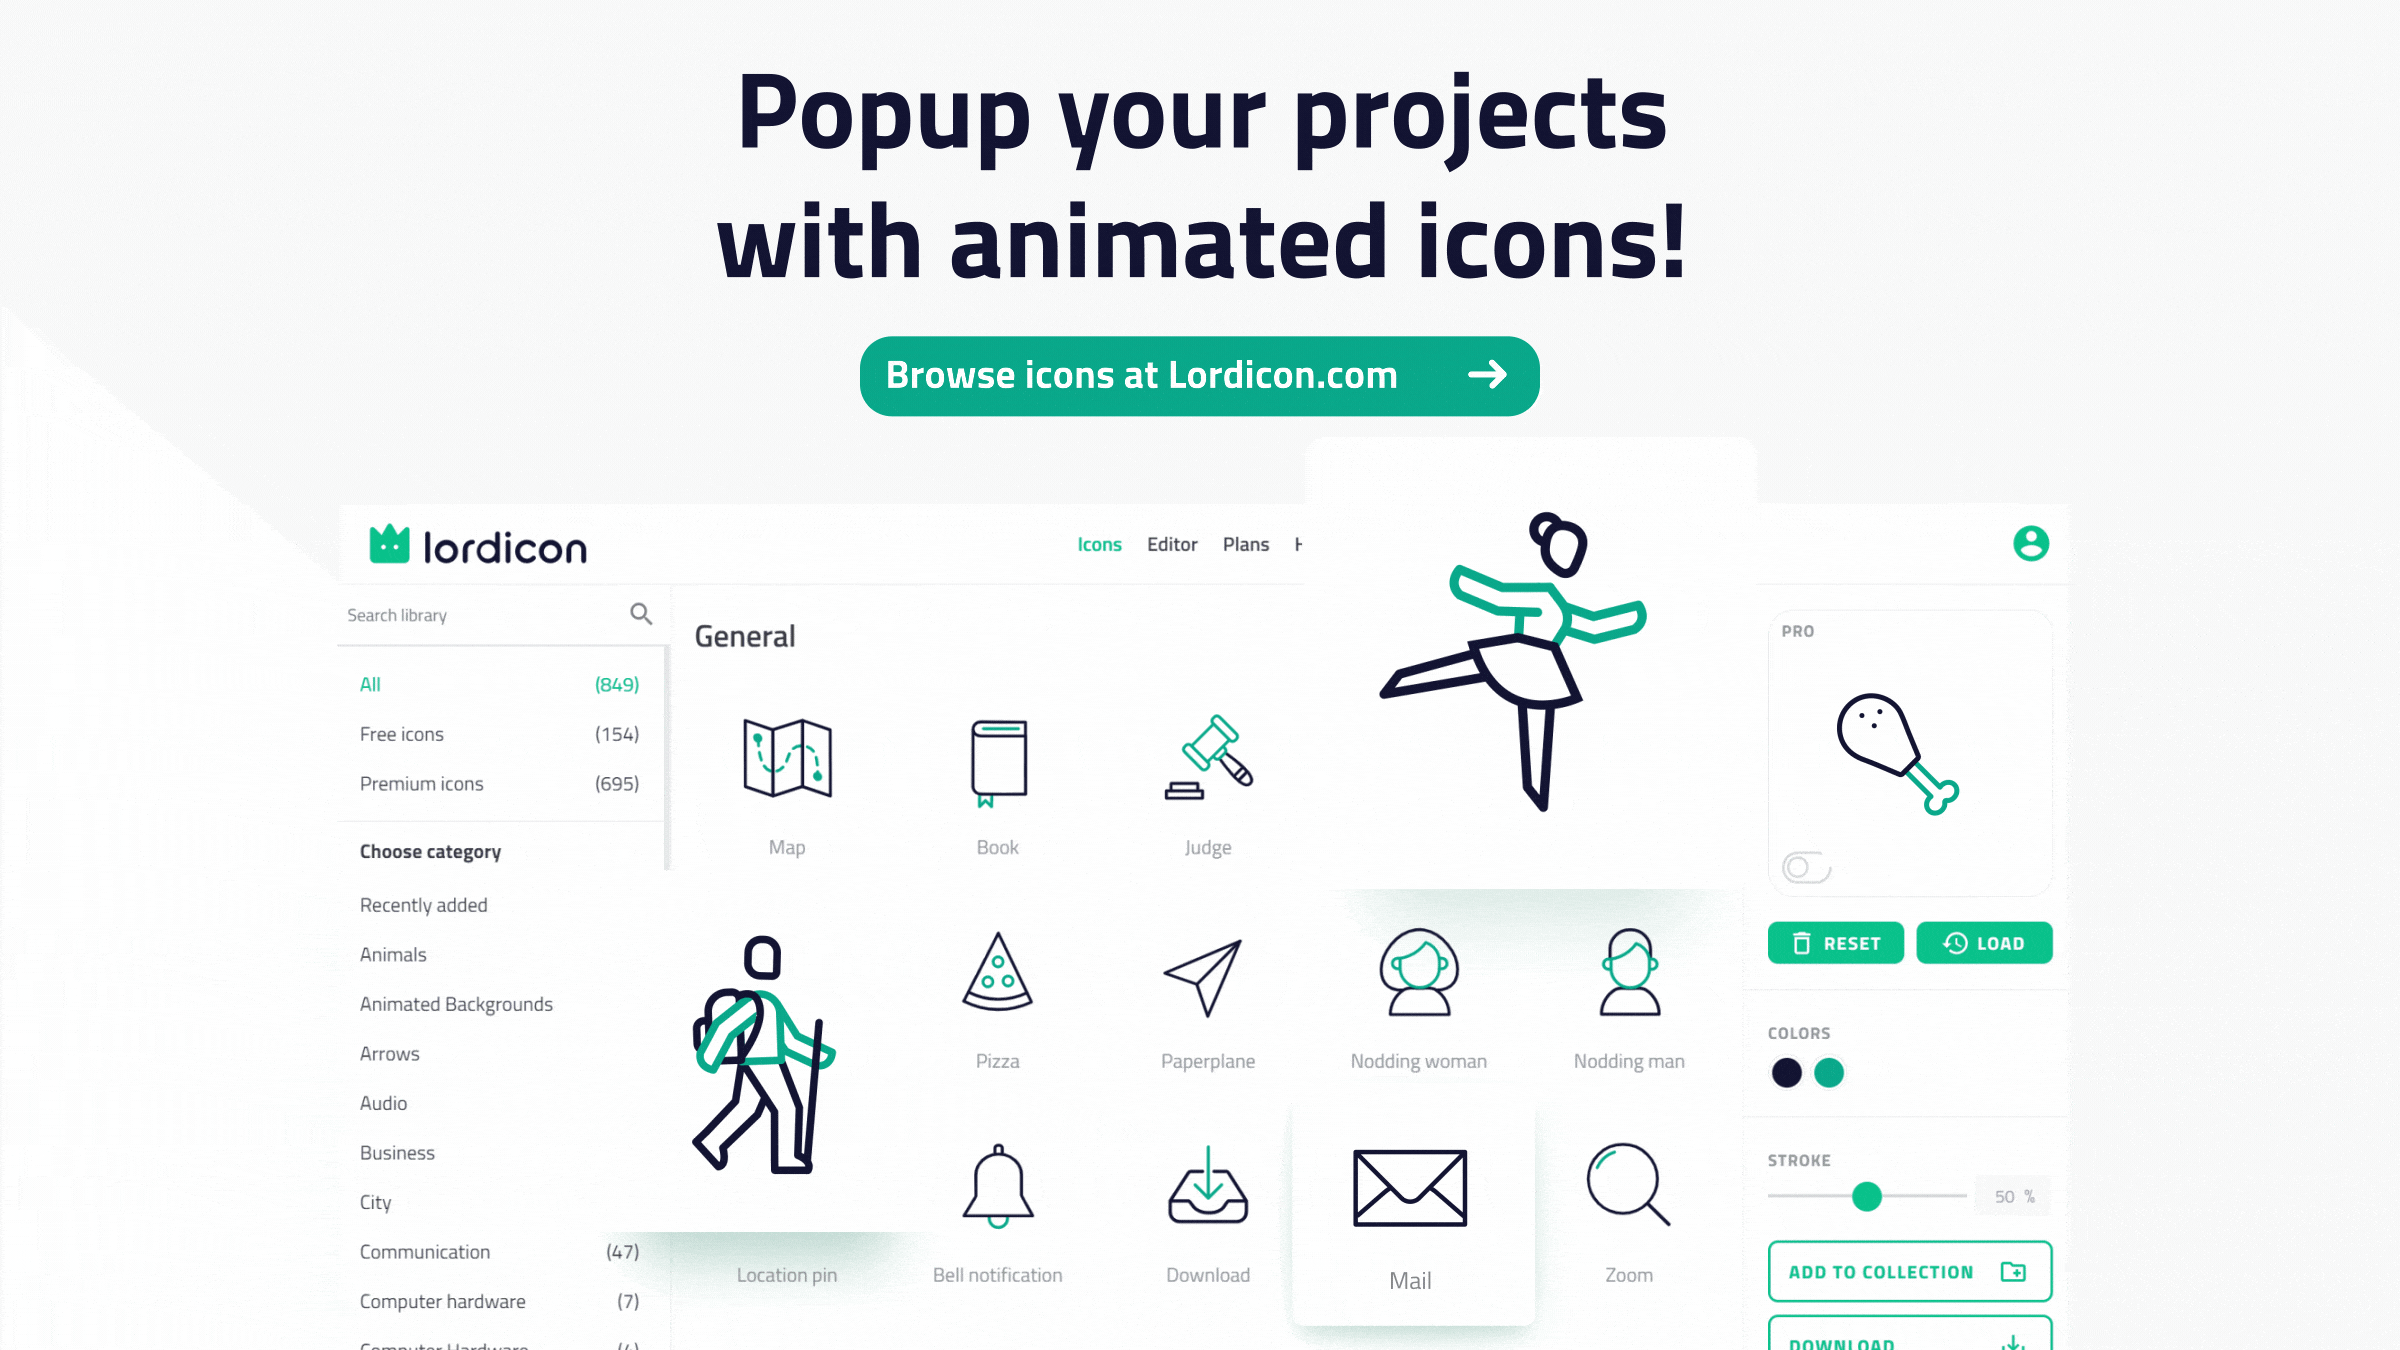 Another great tool with thousands of icons to choose from. I used many of the animated icons in my site redesign. They really helped bring the overall design and layout to life and it was super affordable!